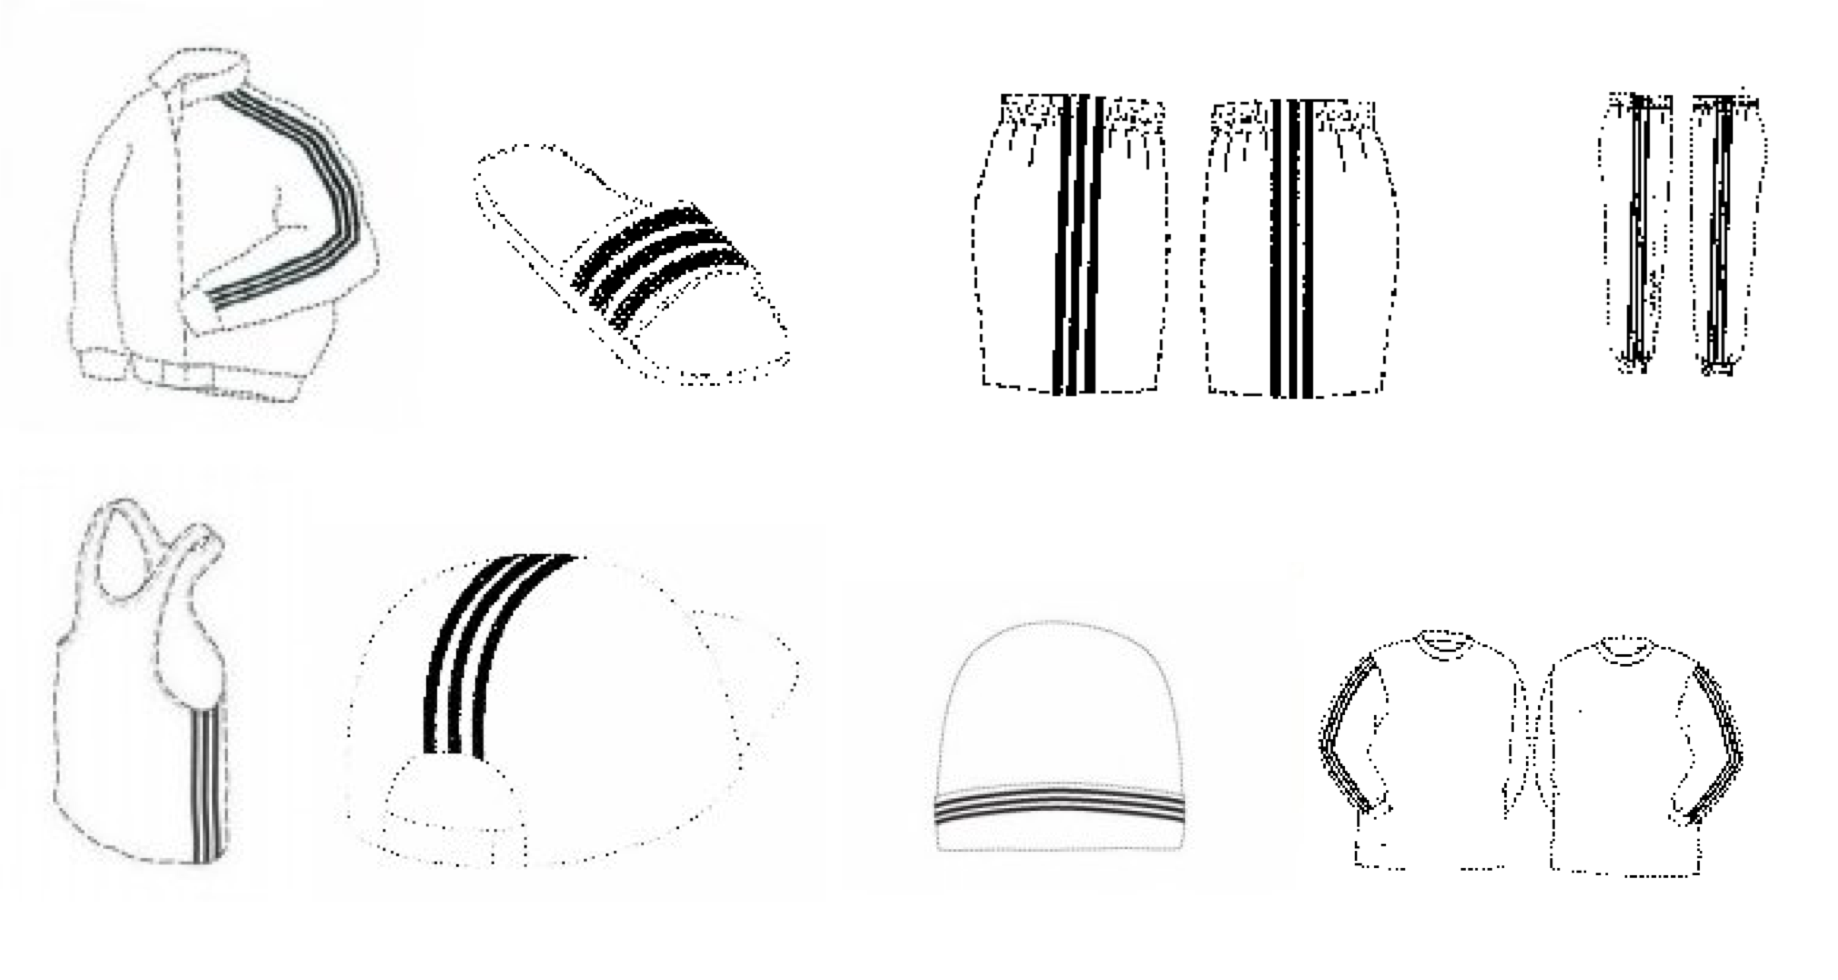  A number of adidas' trademark drawings 